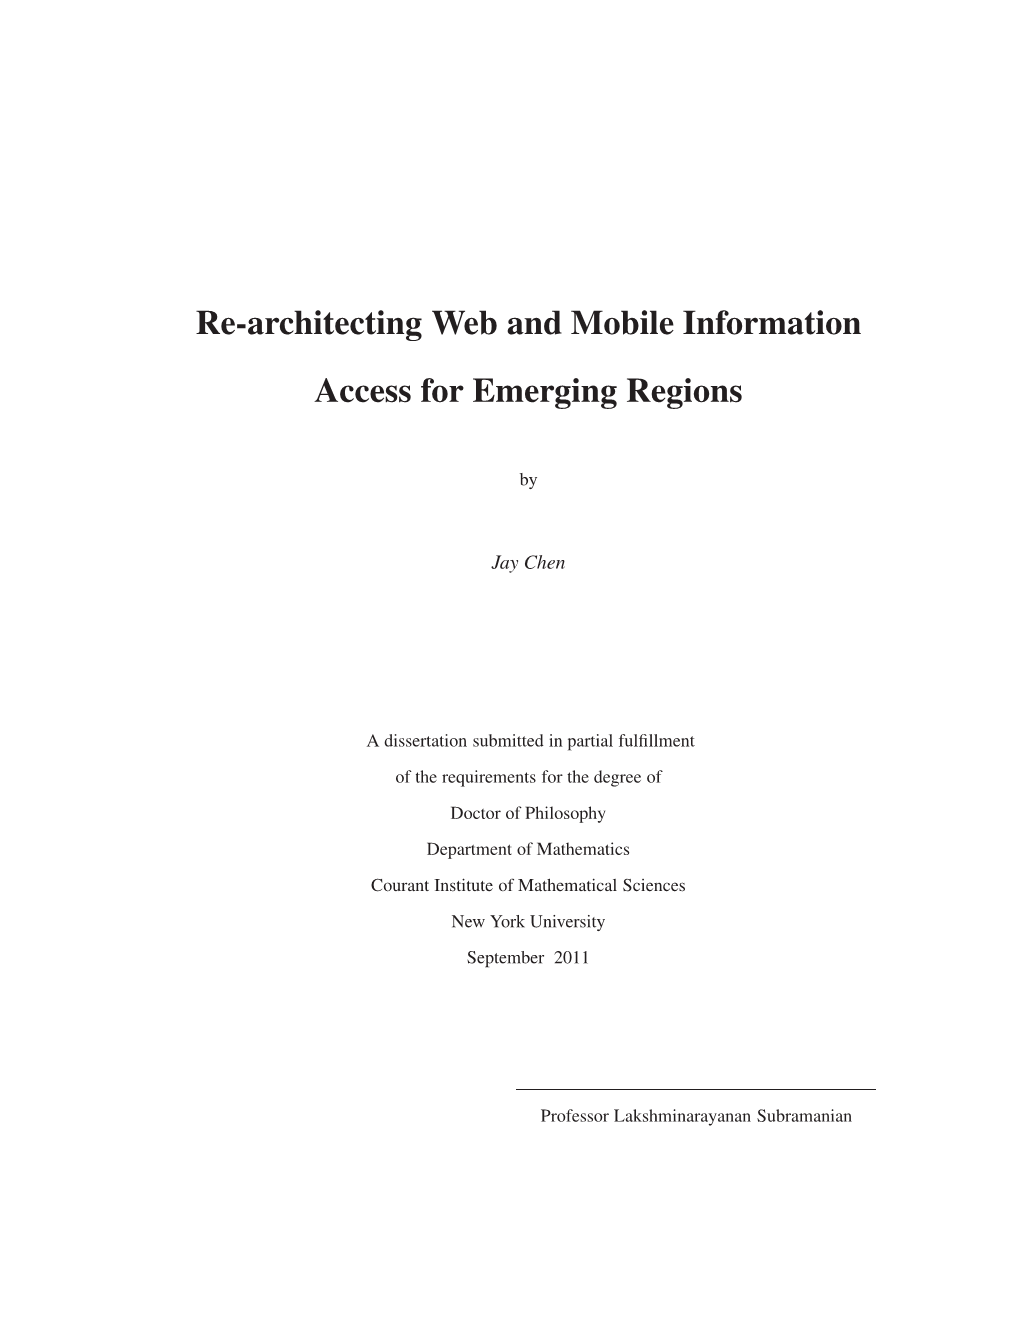 Re-Architecting Web and Mobile Information Access for Emerging Regions